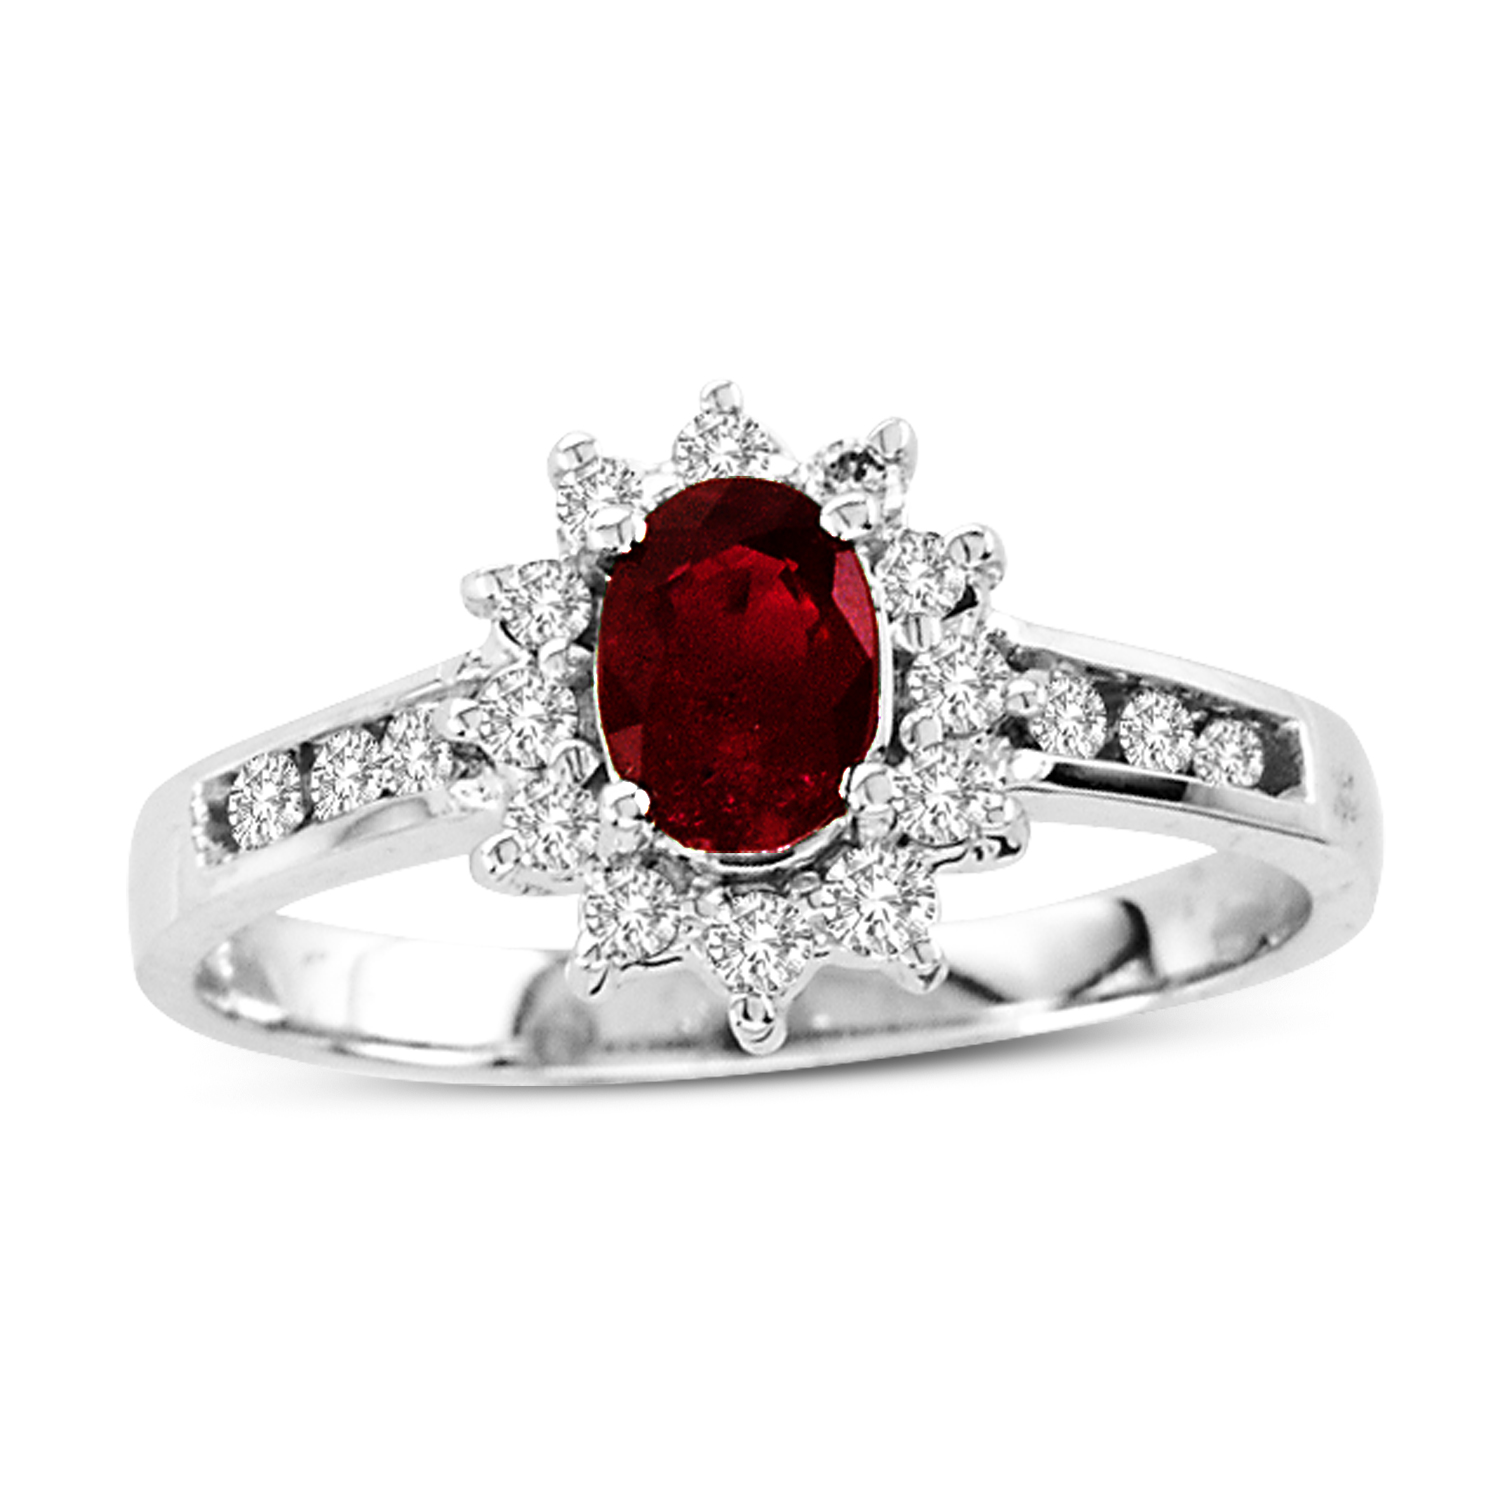 0.85cttw Natural Heated Ruby and Diamond Fashion Ring set in 14k Gold